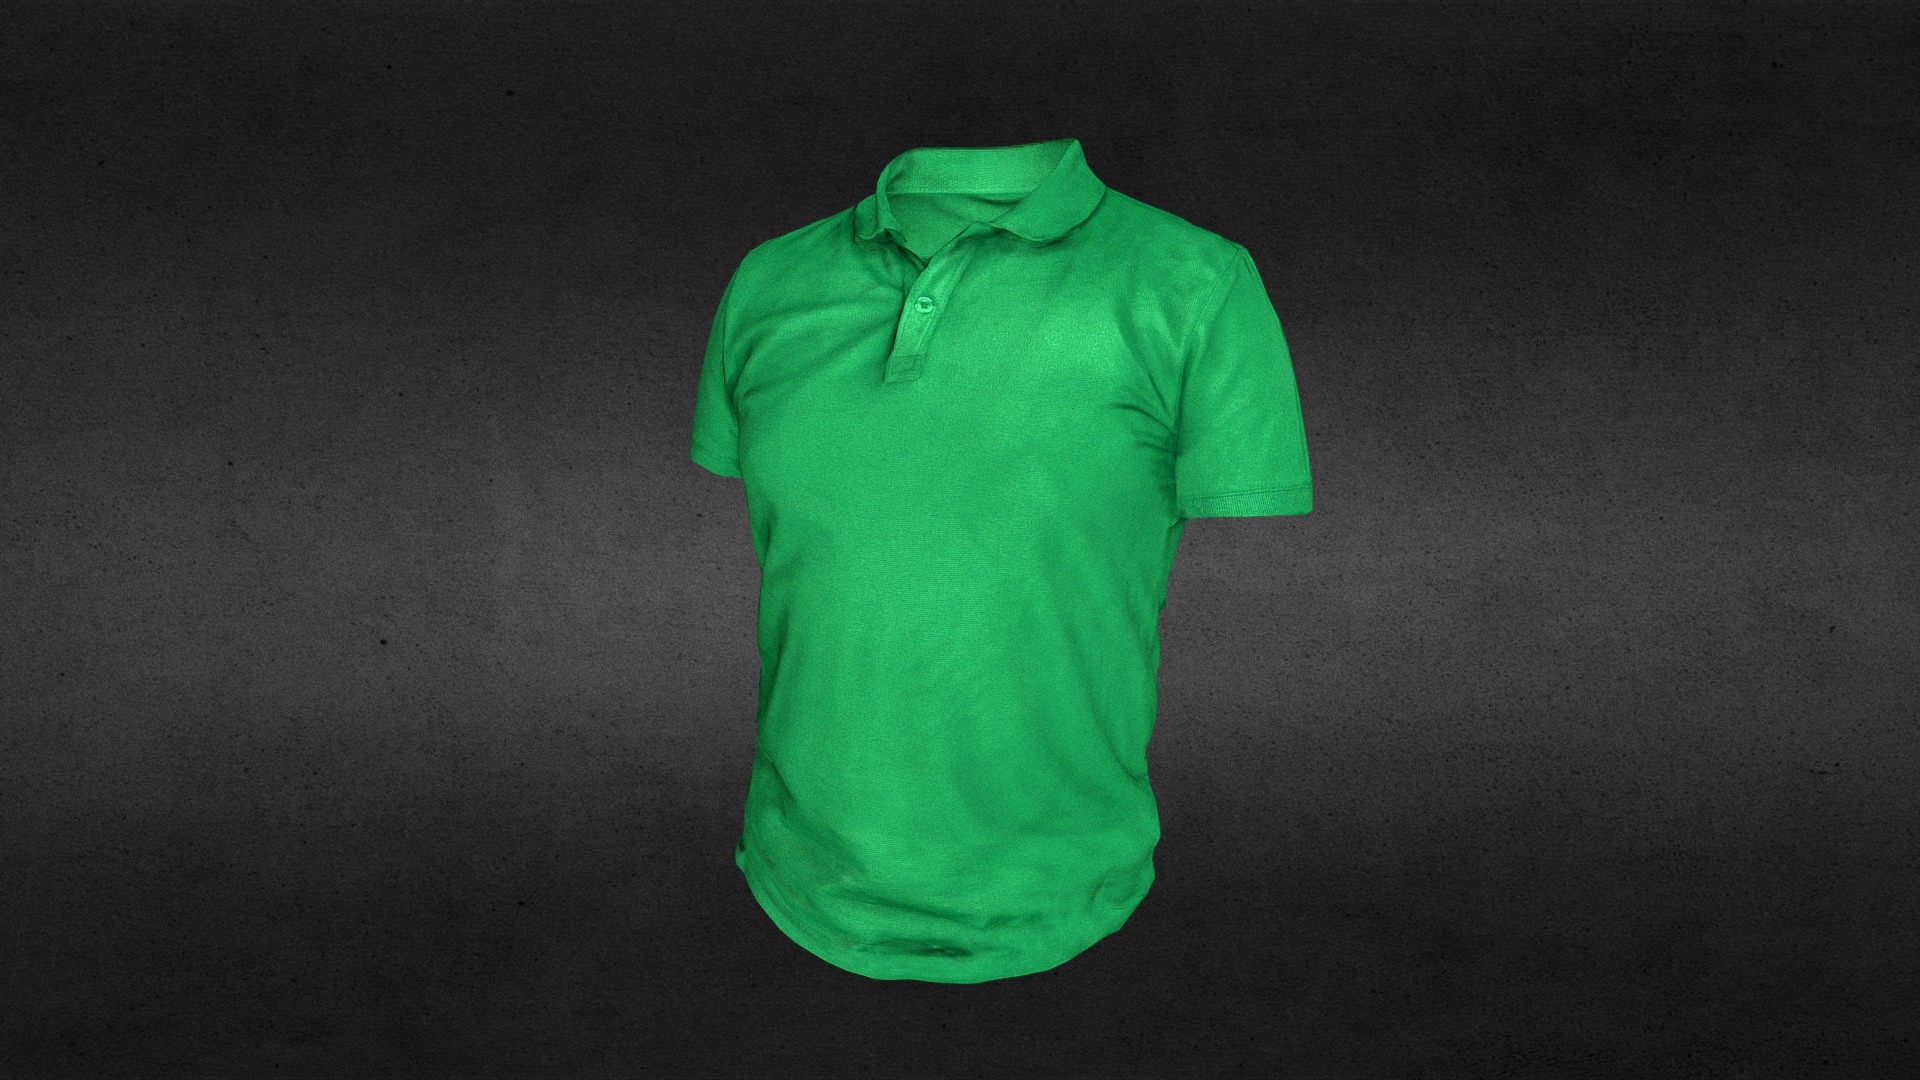 3D model T-shirt - This is a 3D model of the T-shirt. The 3D model is about a green shirt on a black surface.